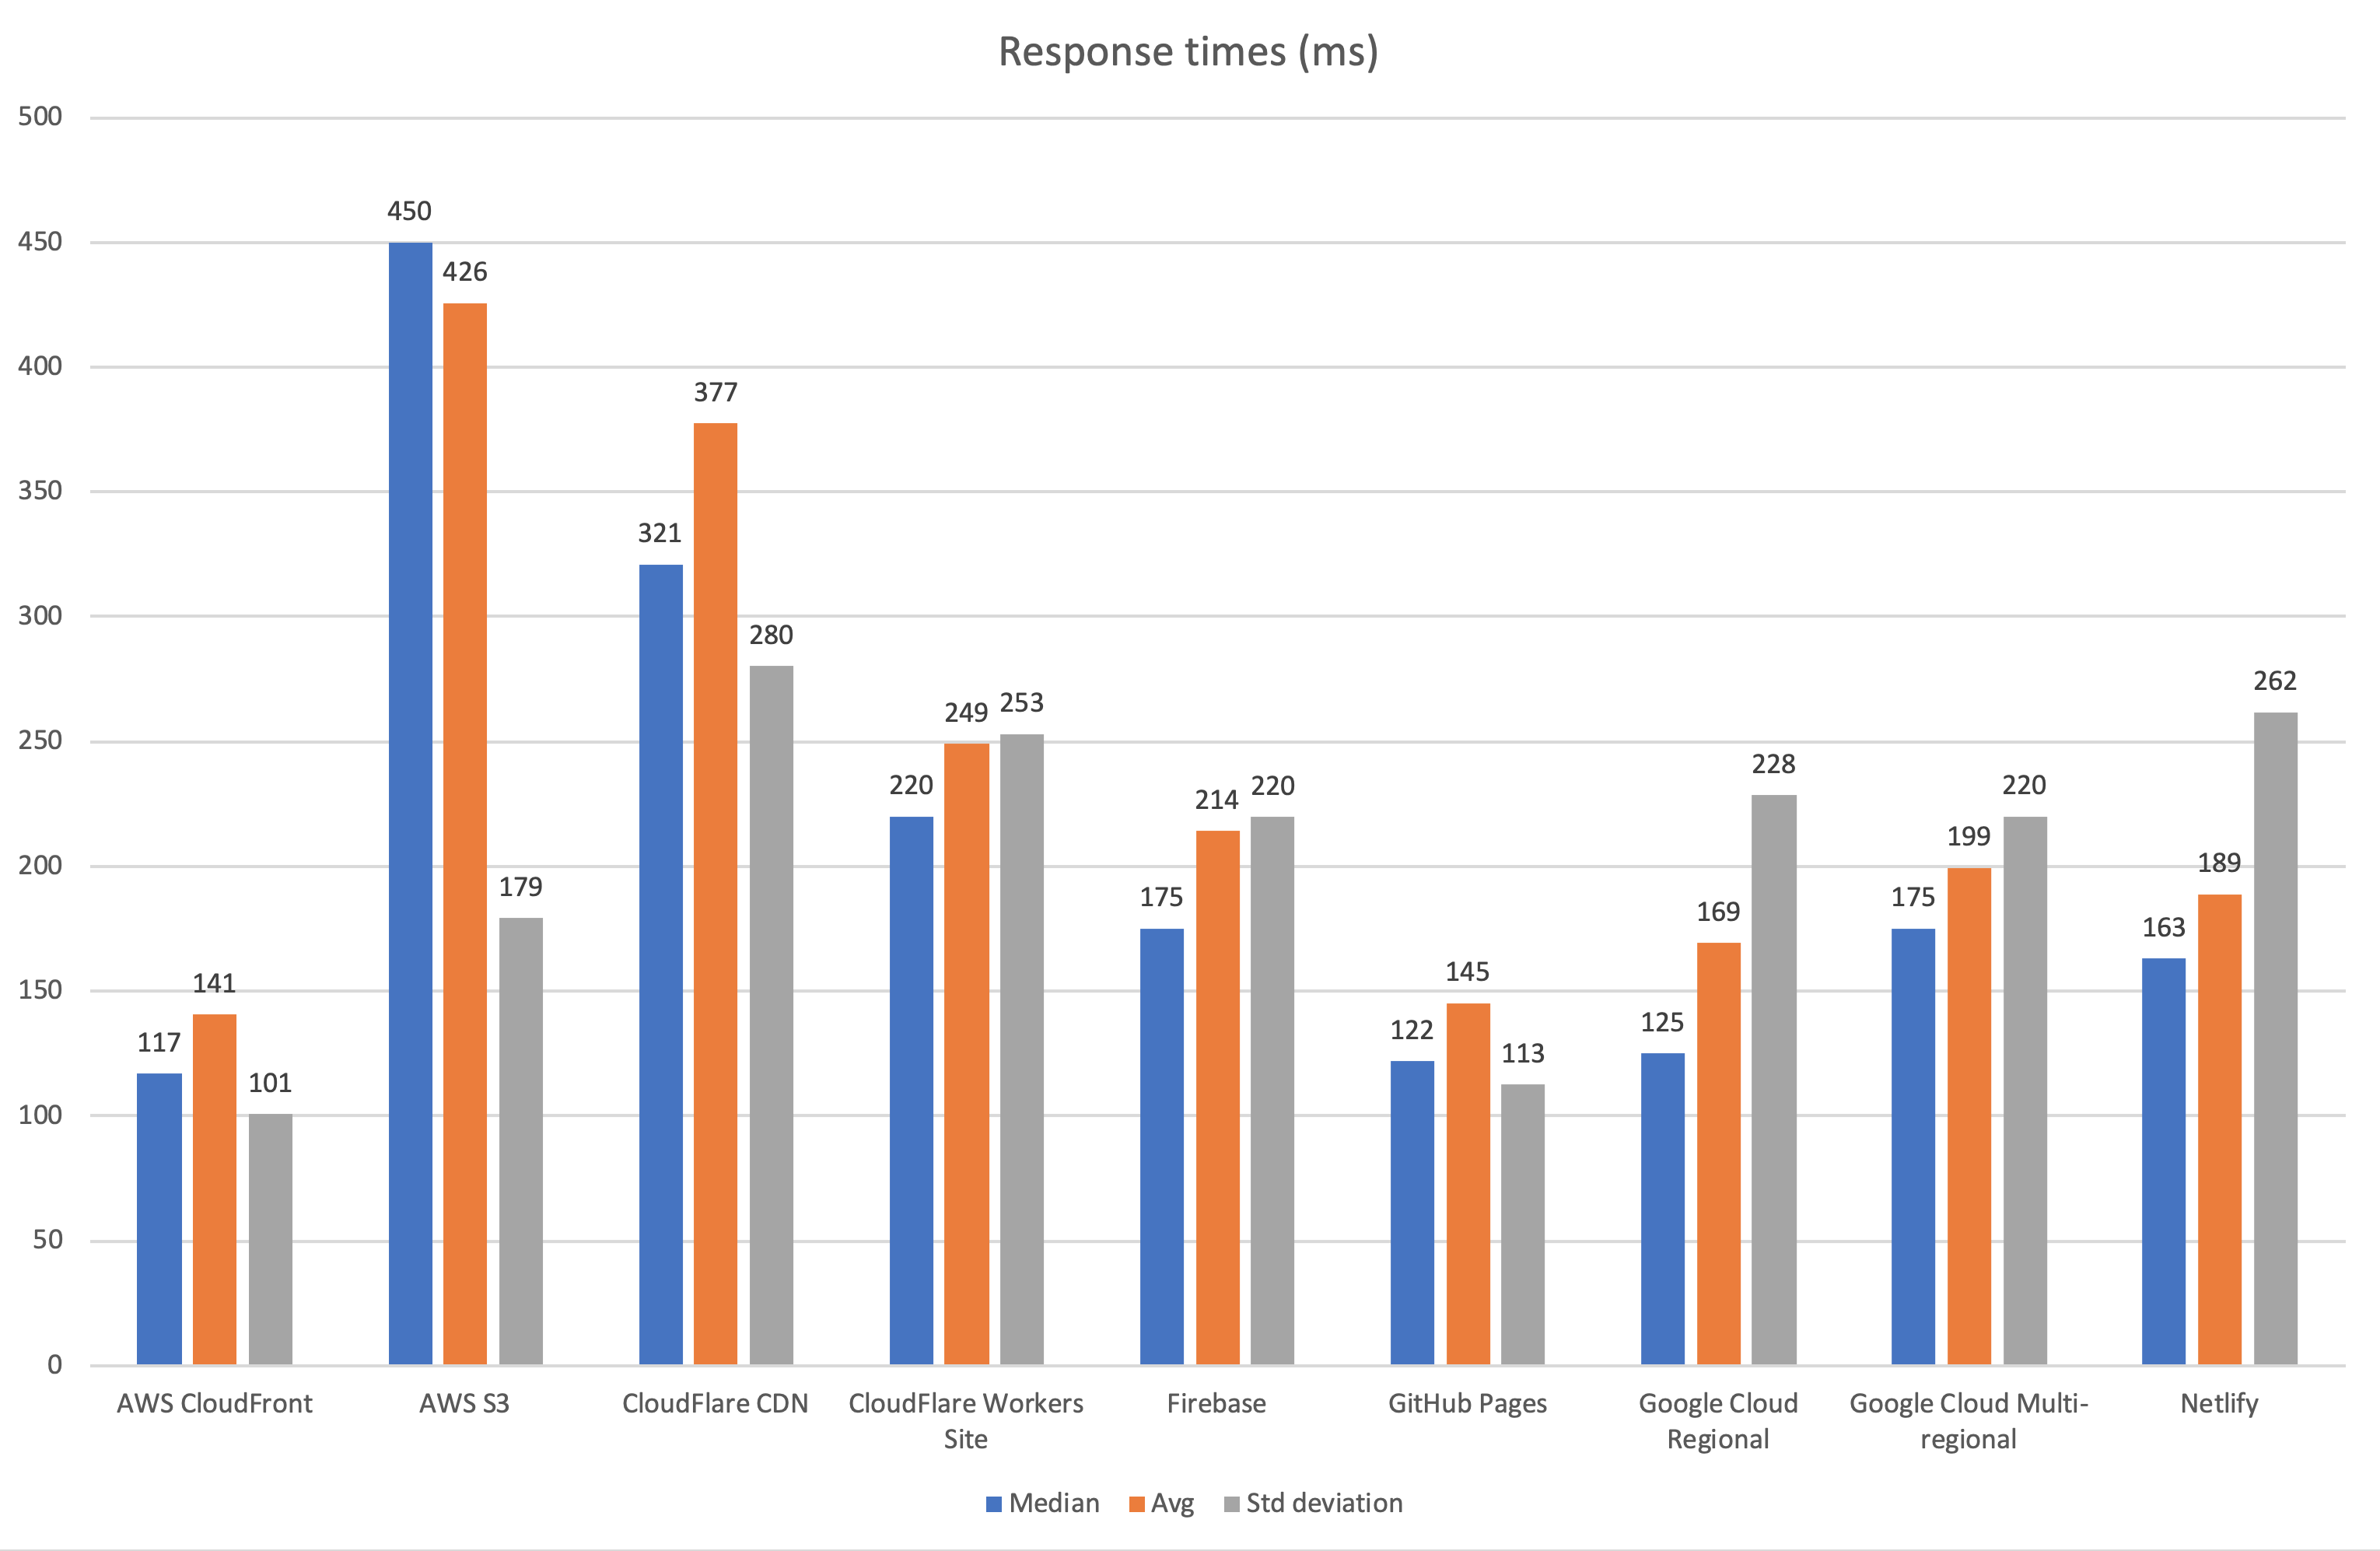 Median response times, measured by Pingdom